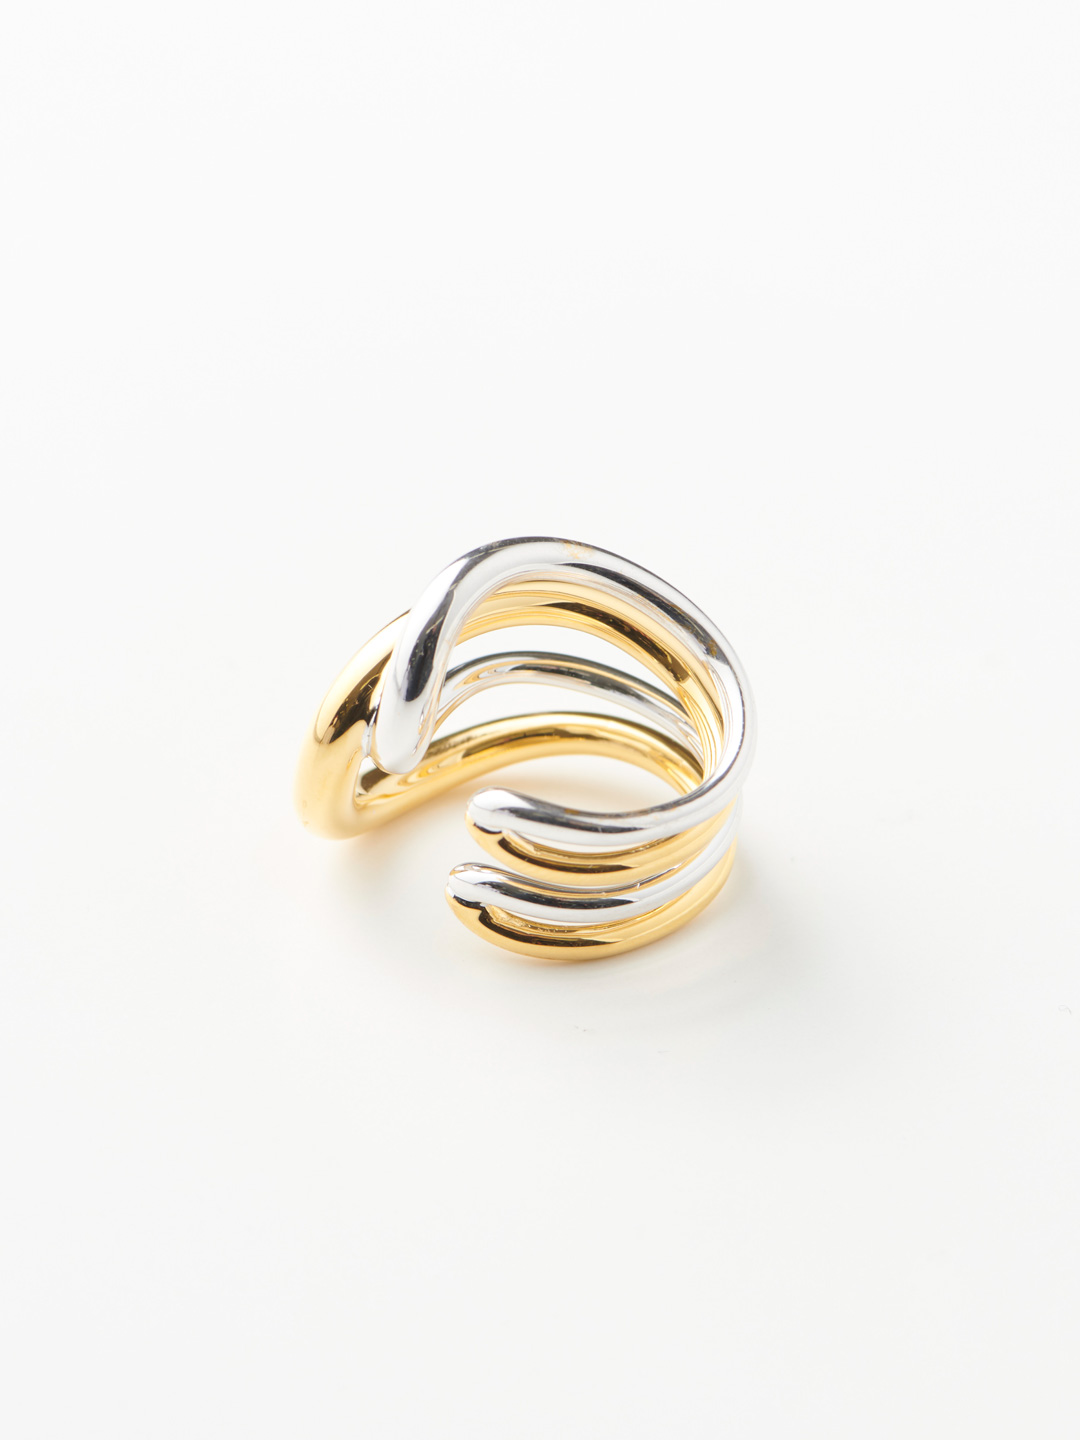 Daisy Ring - Silver/Yellow Gold